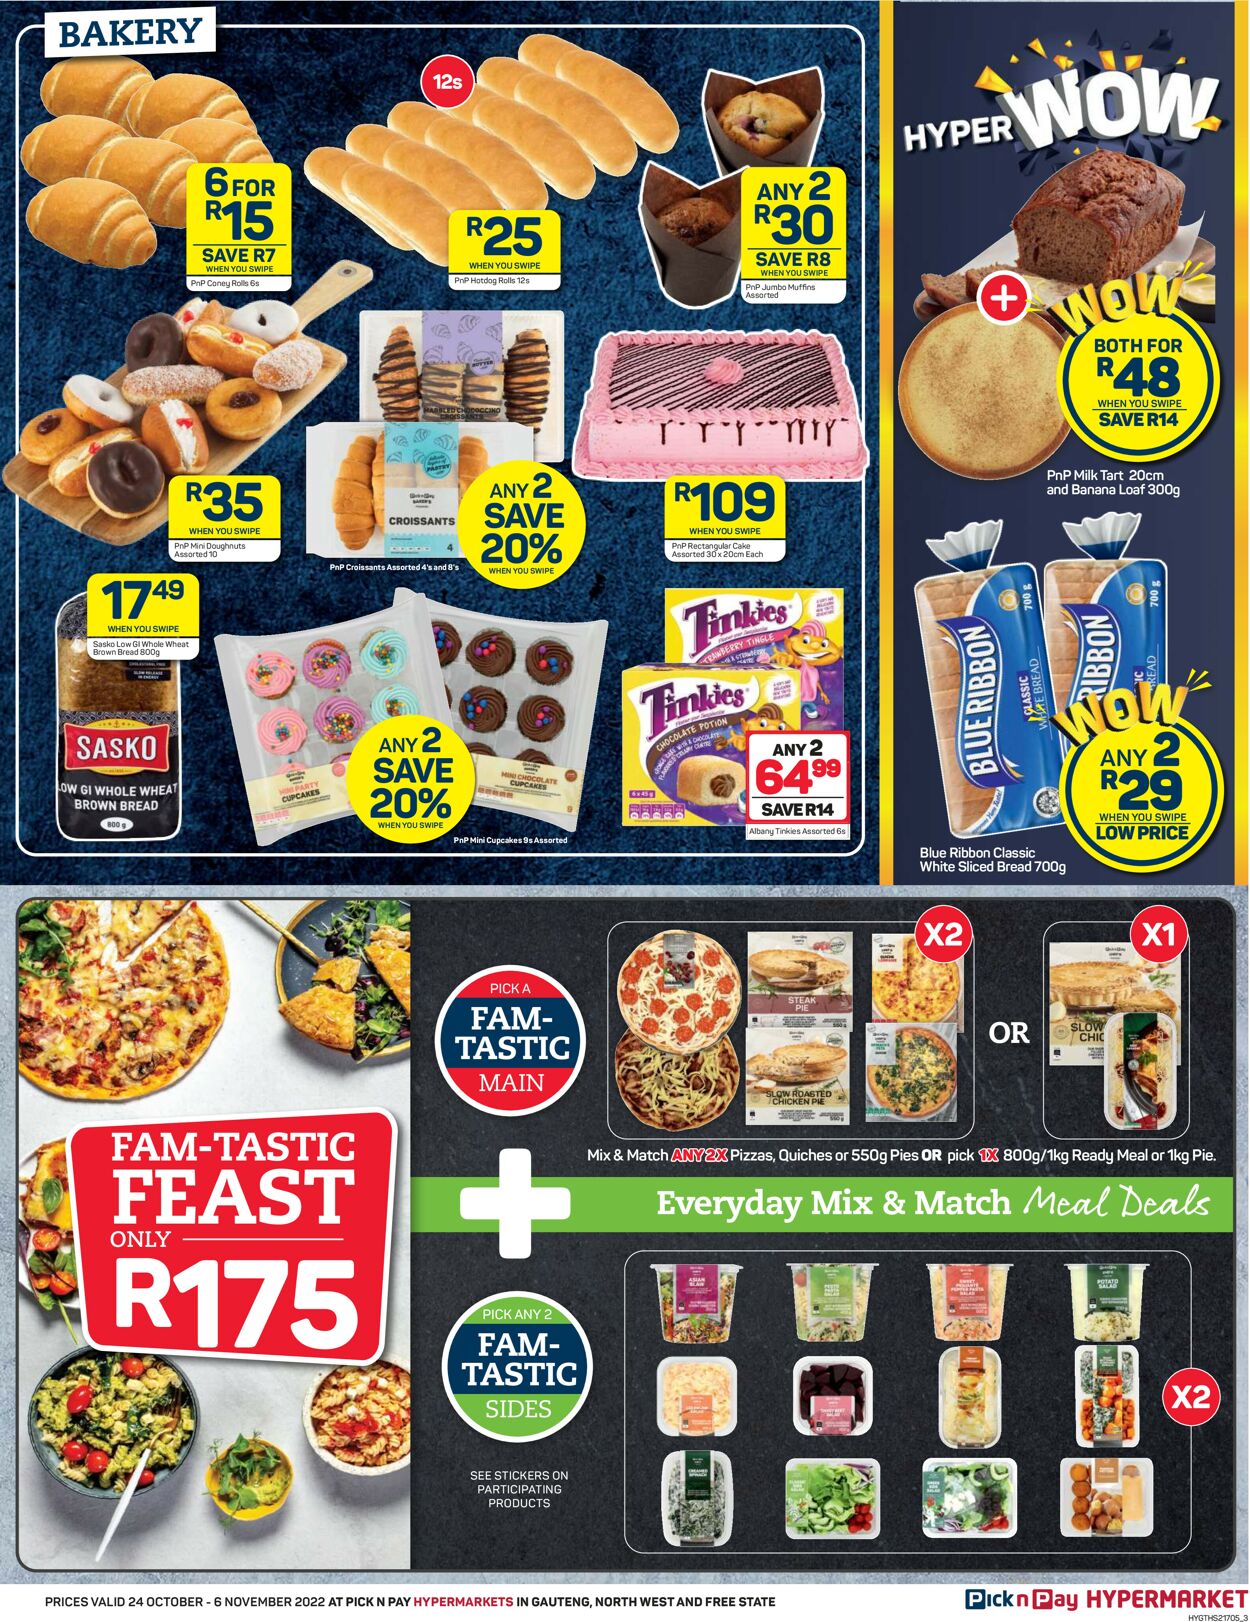 Pick n Pay Catalogue - 2022/10/24-2022/11/06 (Page 3)